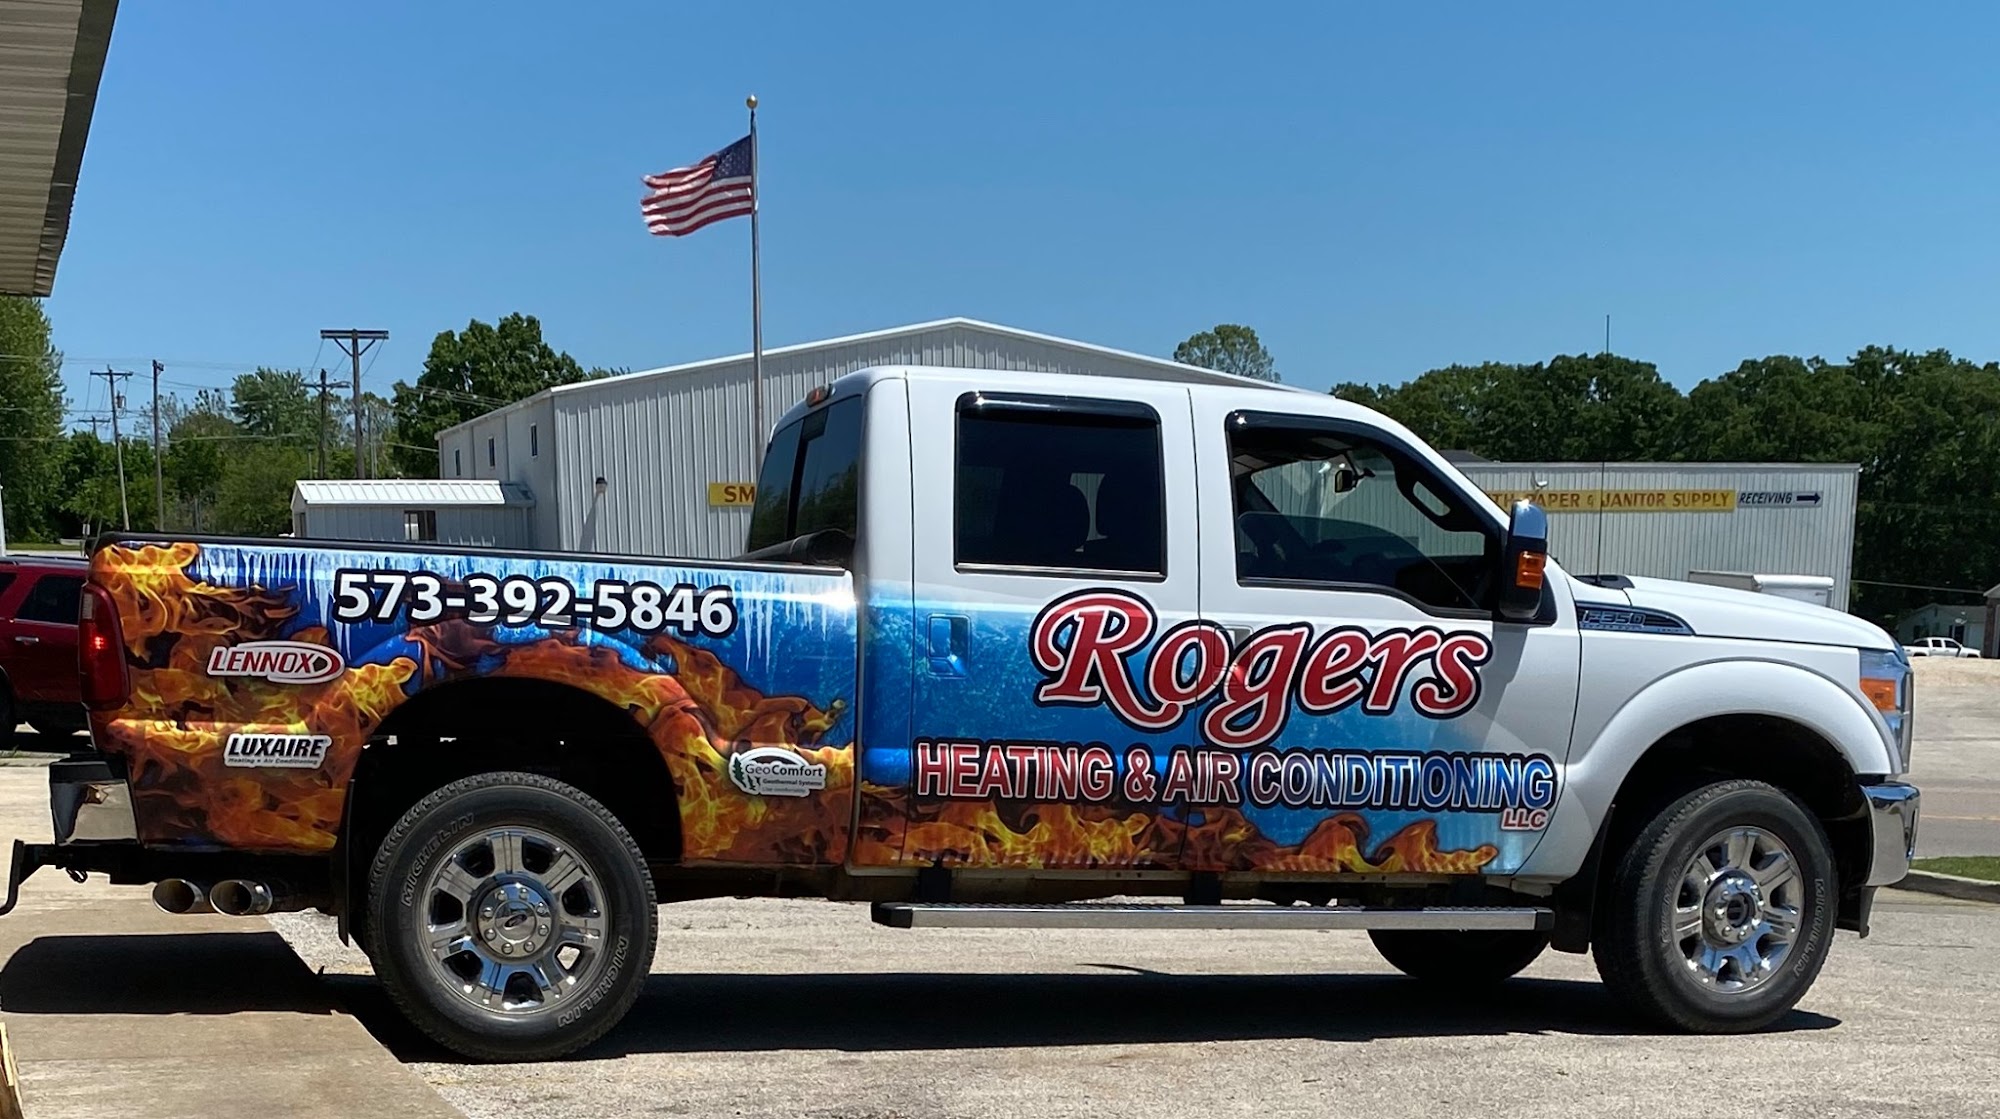 Roger's Heating & Air Conditioning LLC